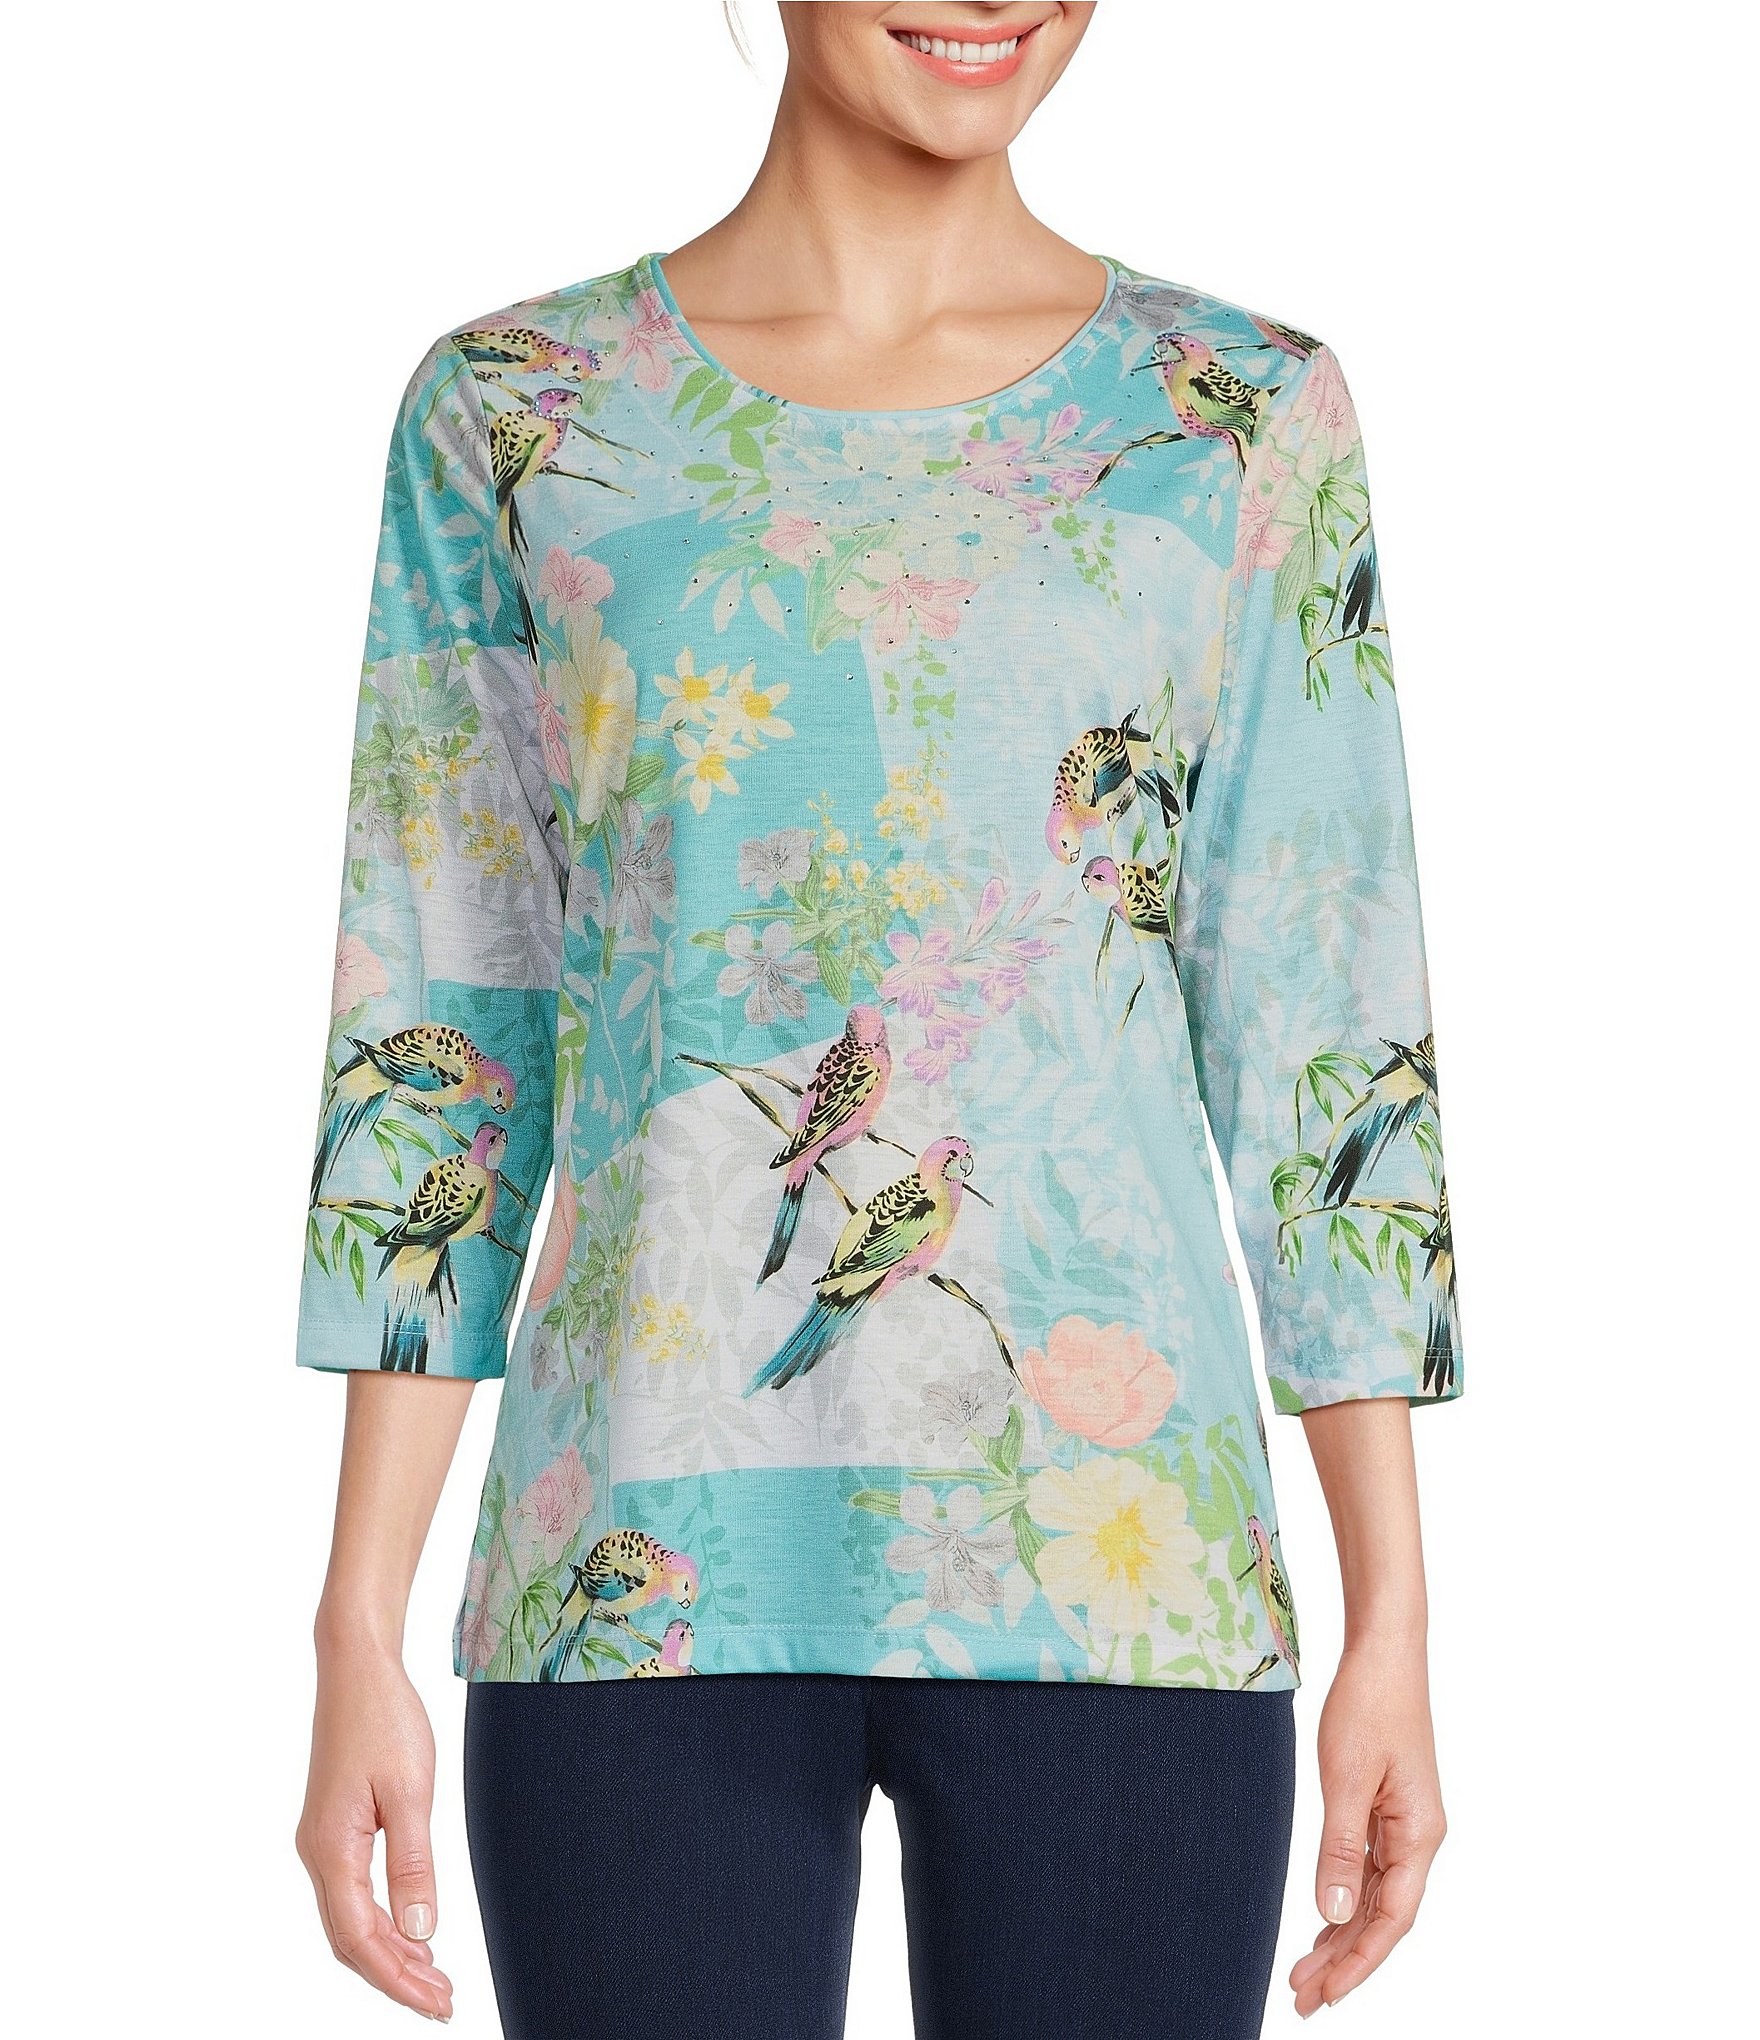 Allison Daley Petite Size Parrot Floral Patches Print Embellished Crew ...